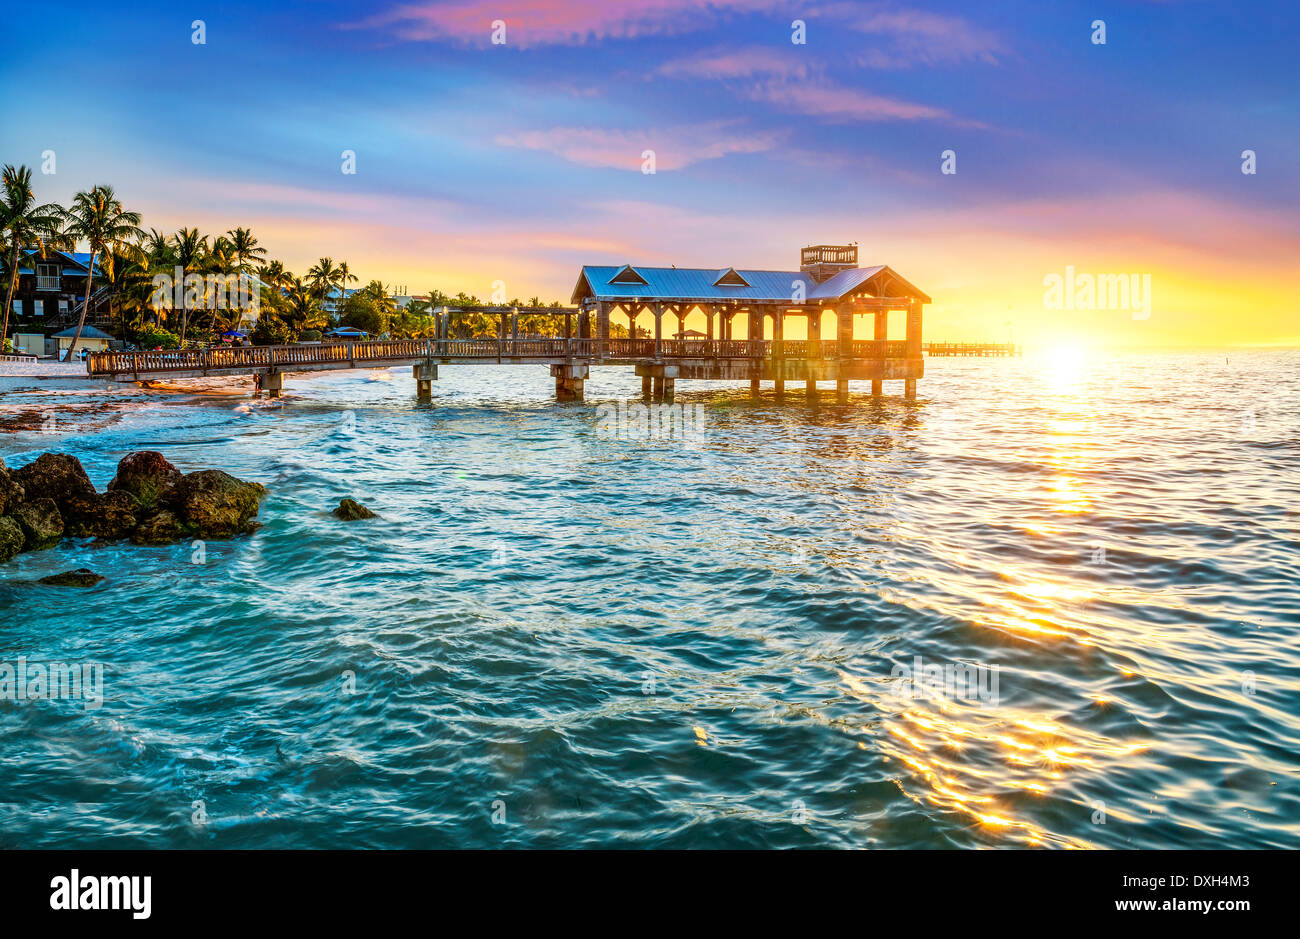 Pier at the beach in Key West, Florida USA Stock Photo